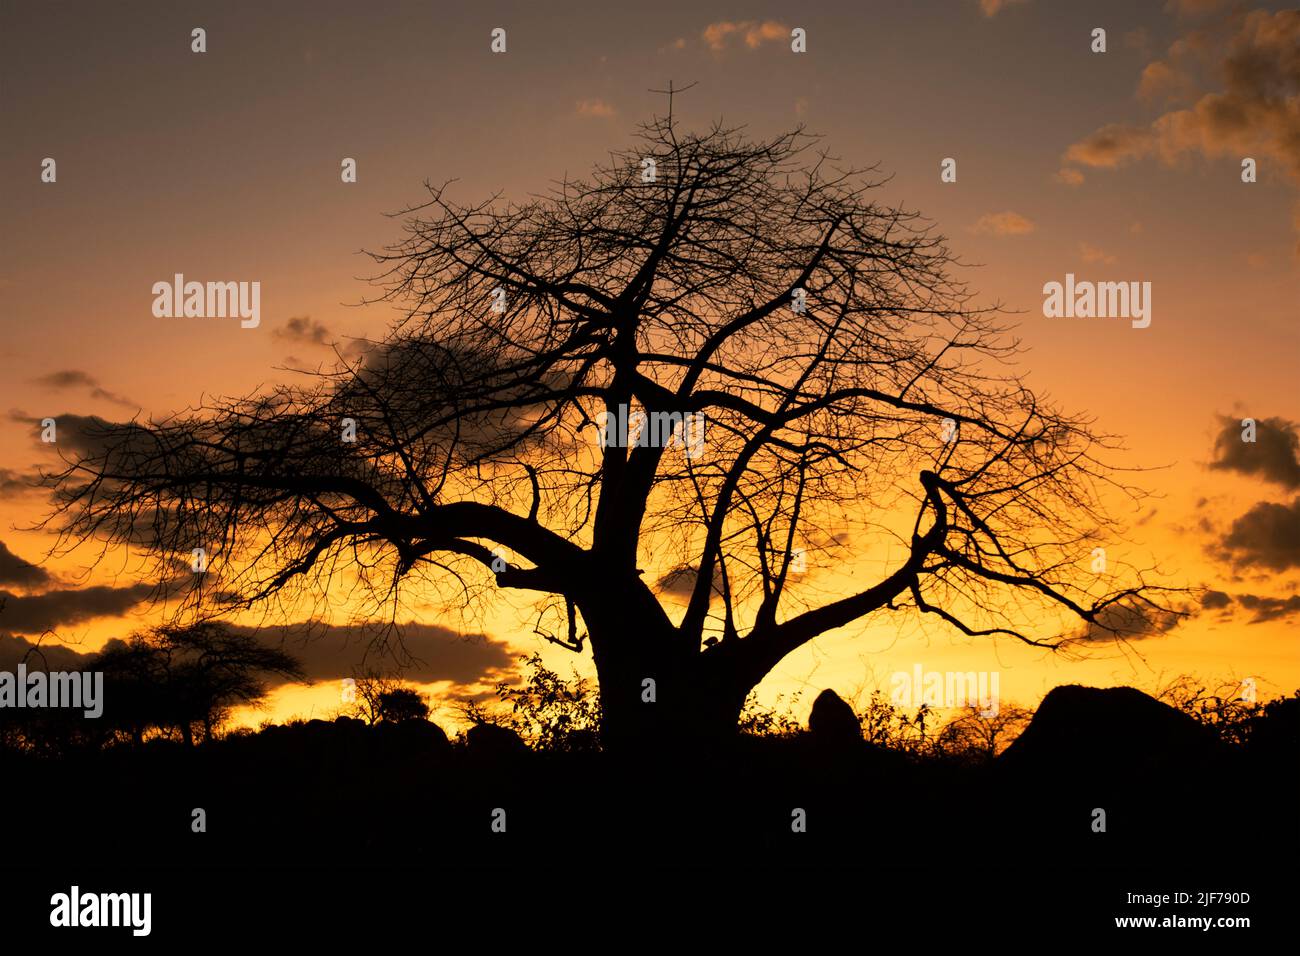 Ancient Baobabs stand silhouetted against the last glow of dusk in Ruaha National Park. The tree has a distinctive upside down shape Stock Photo